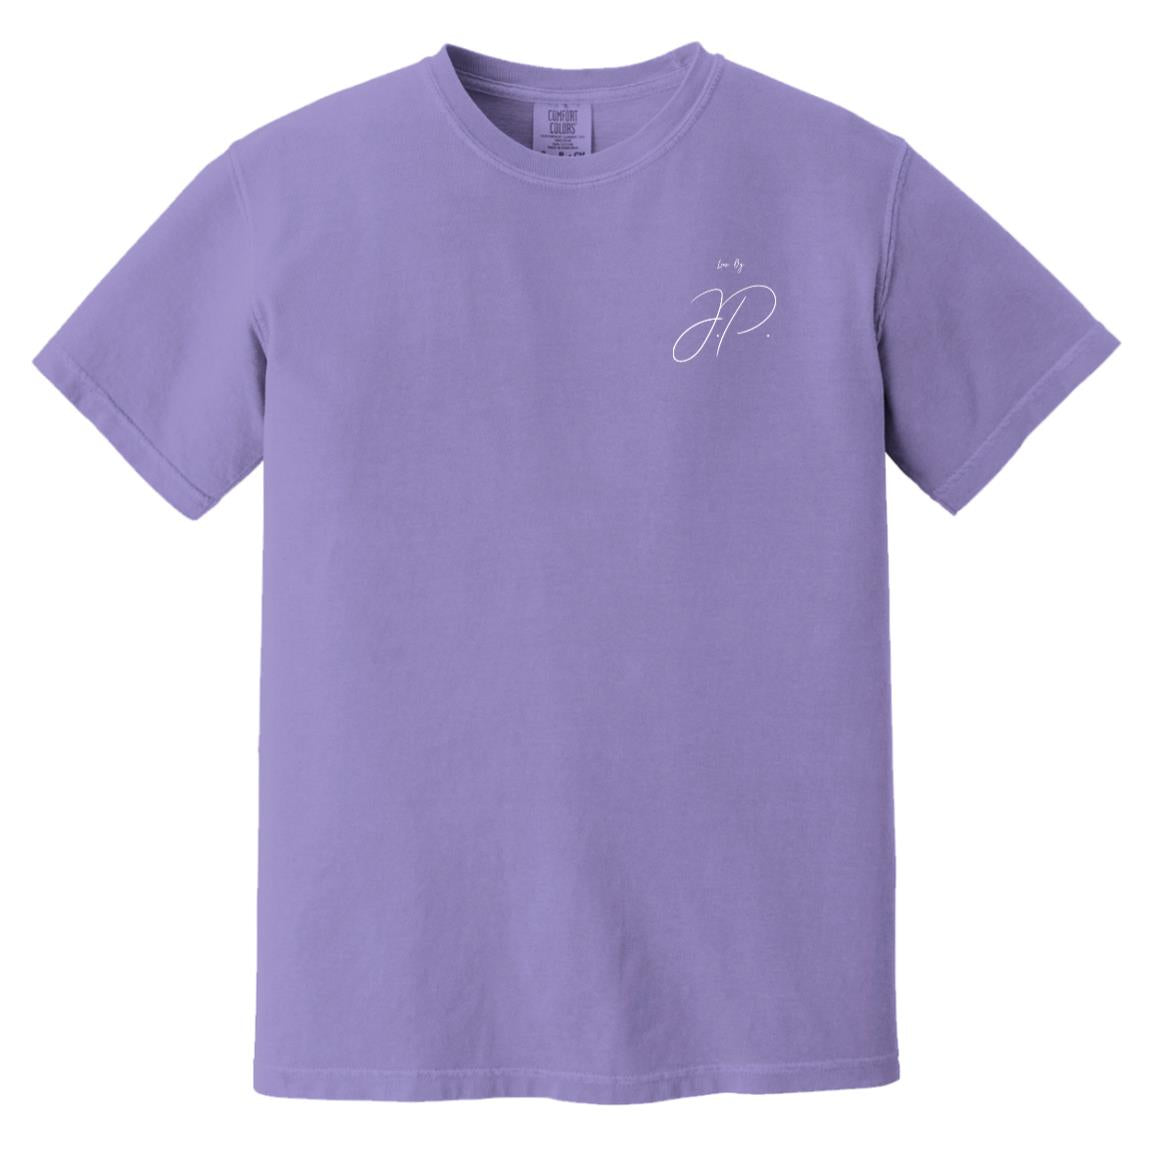 Lux. Heavyweight T-Shirt - Violet - Colors Edition